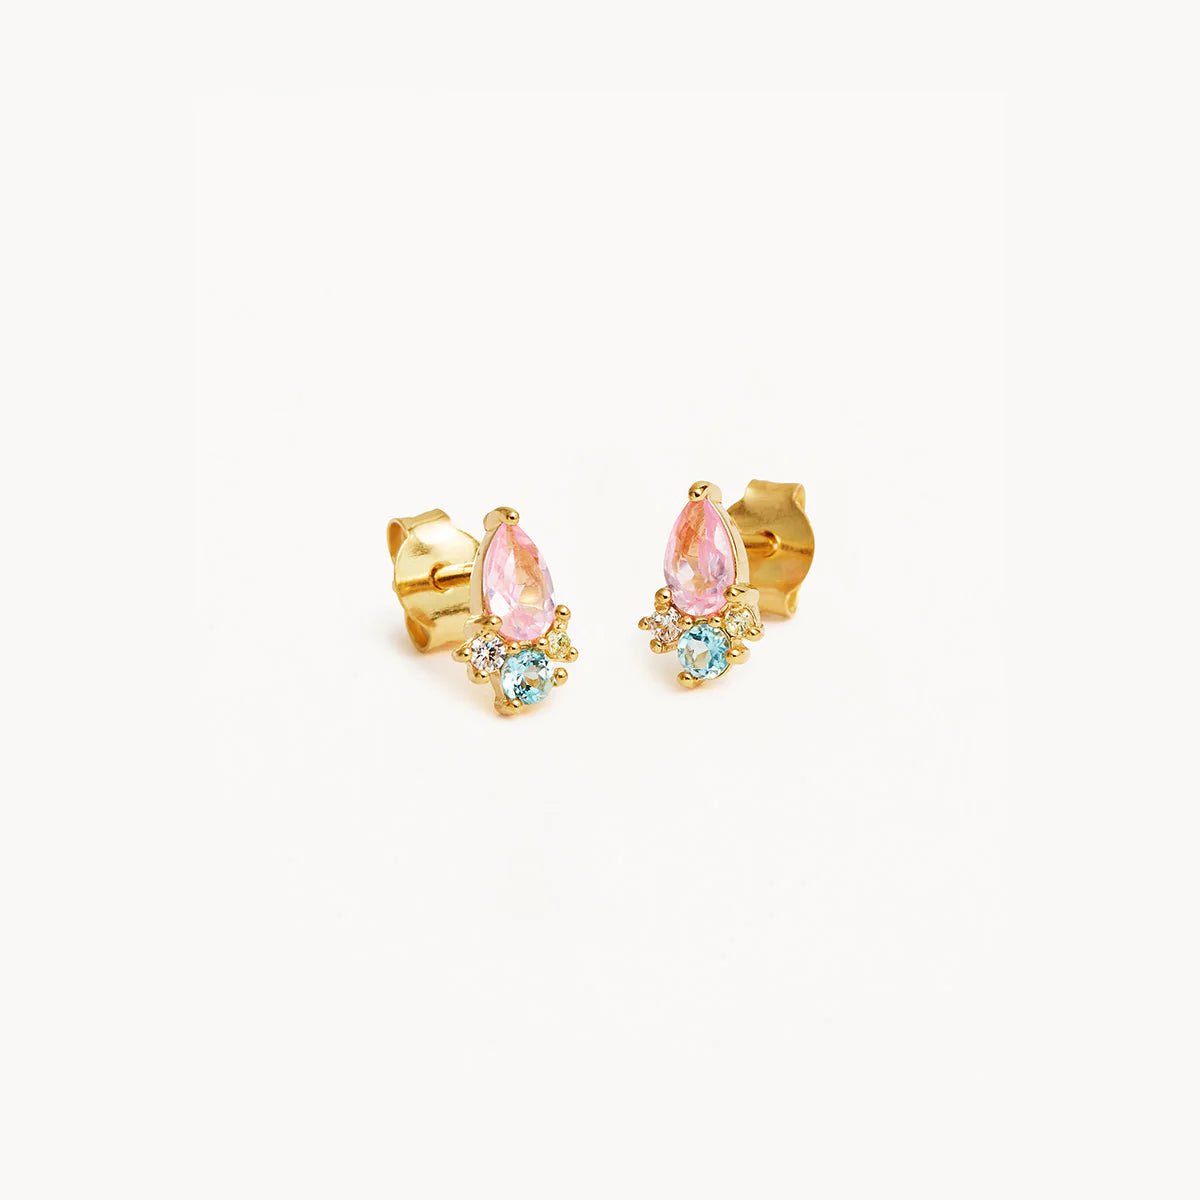 By Charlotte - Cherished Connections Stud Earrings Gold Vermeil